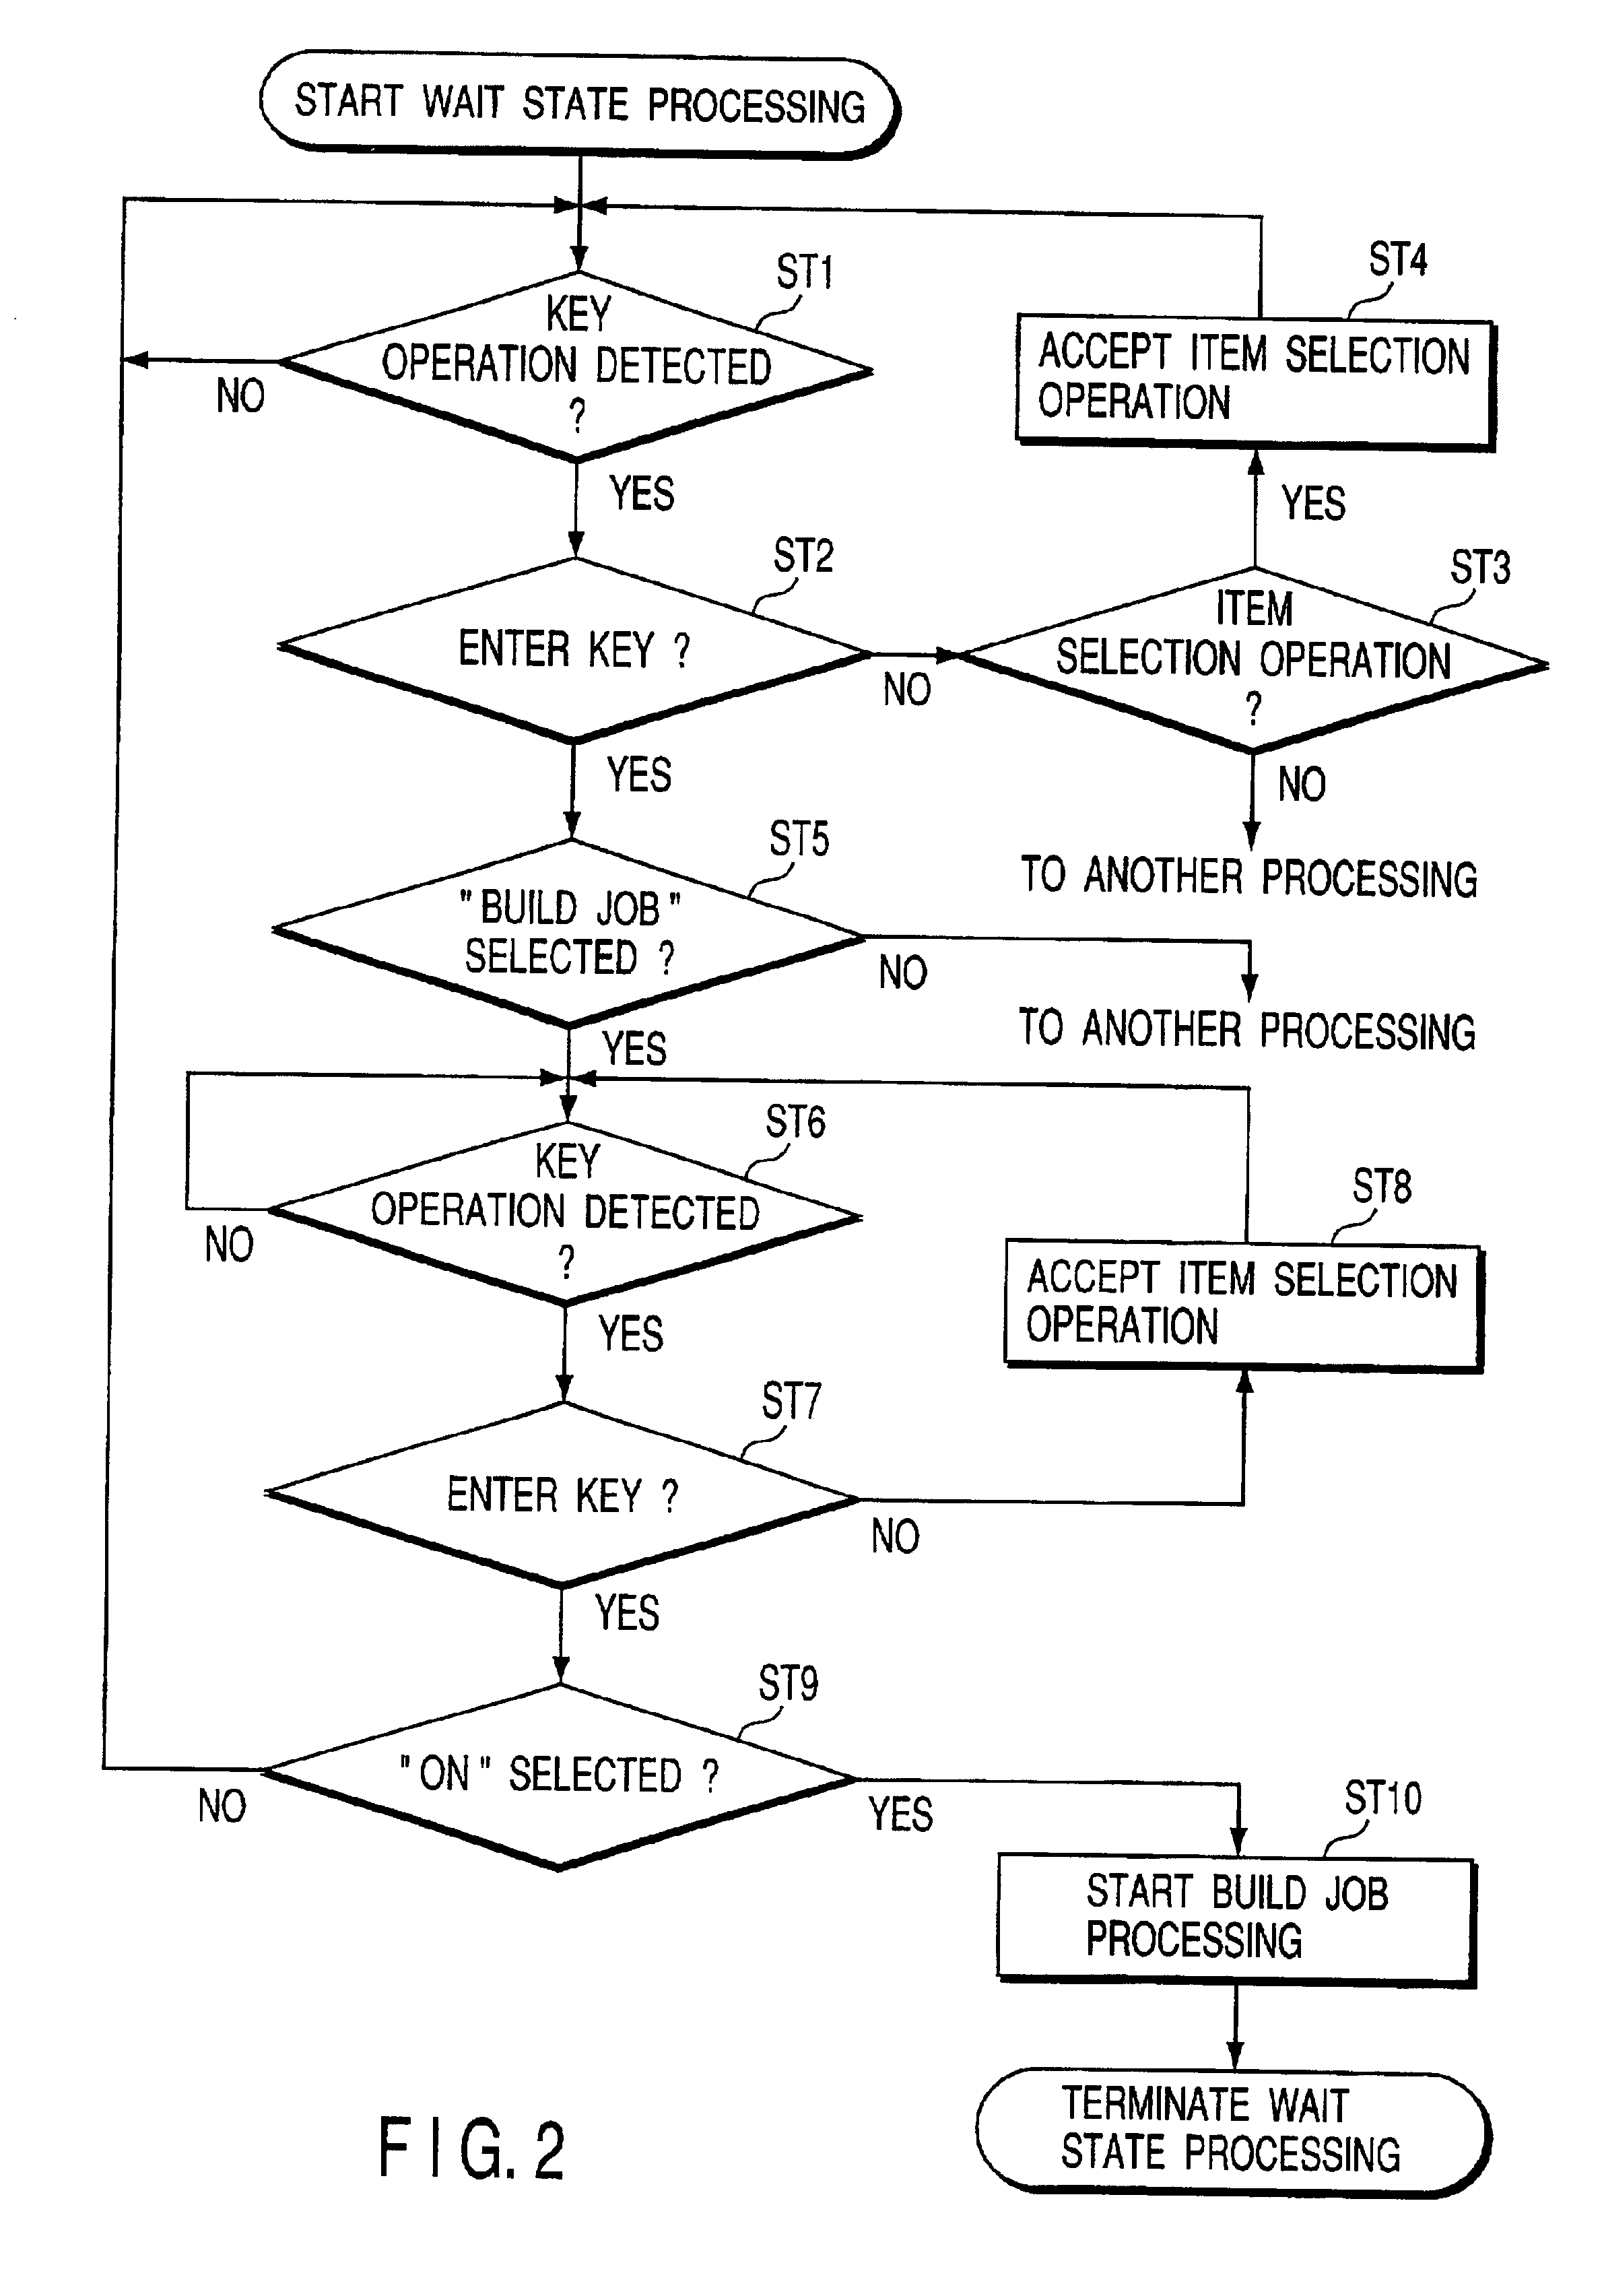 Document scanning apparatus and document scanning method for sequentially scanning documents and generating image data corresponding to these documents